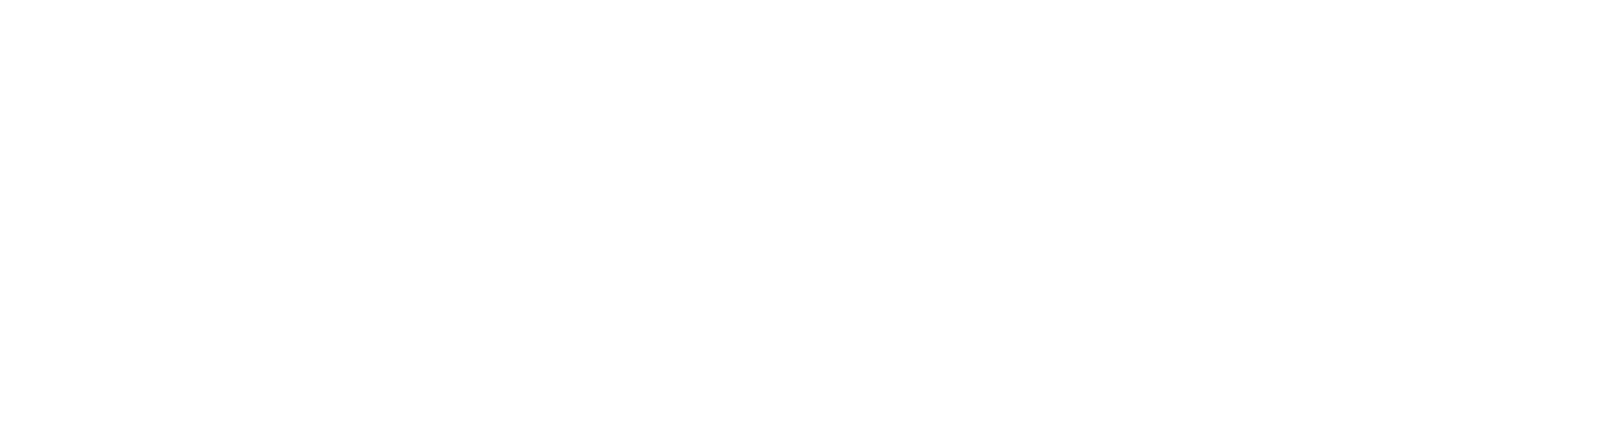 Micron Technology logo large for dark backgrounds (transparent PNG)